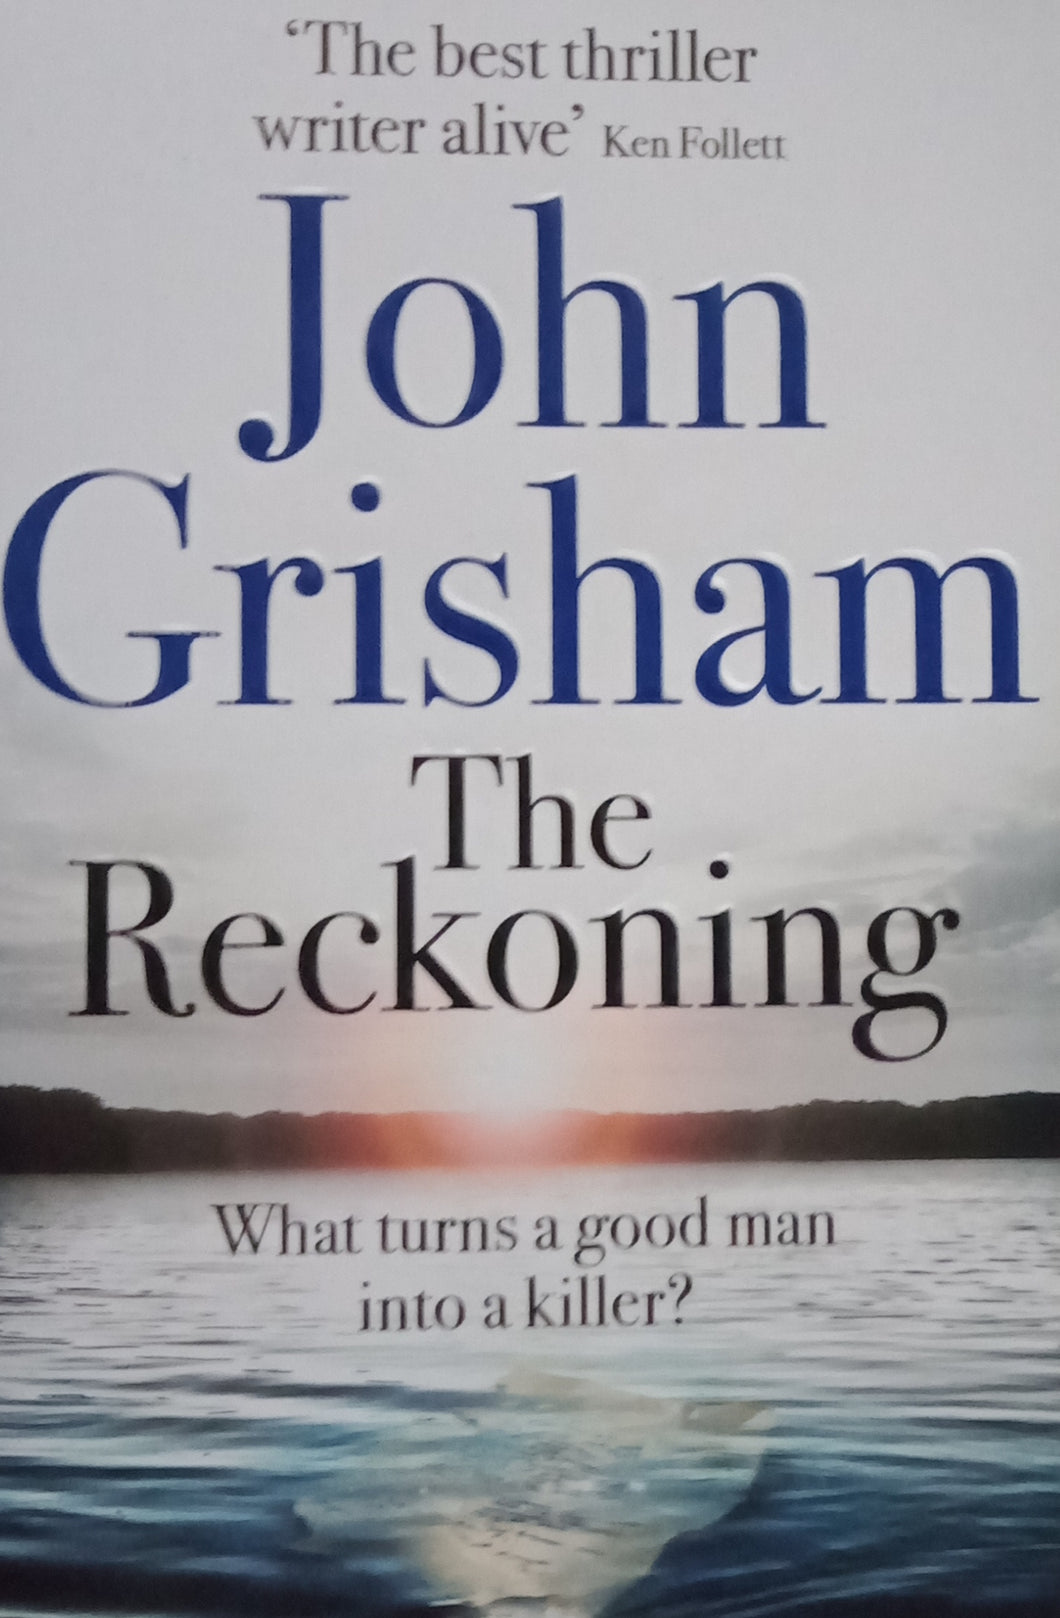 Less　Books　The　John　–　Reckoning　Grisham　Online　by　for　Bookstore